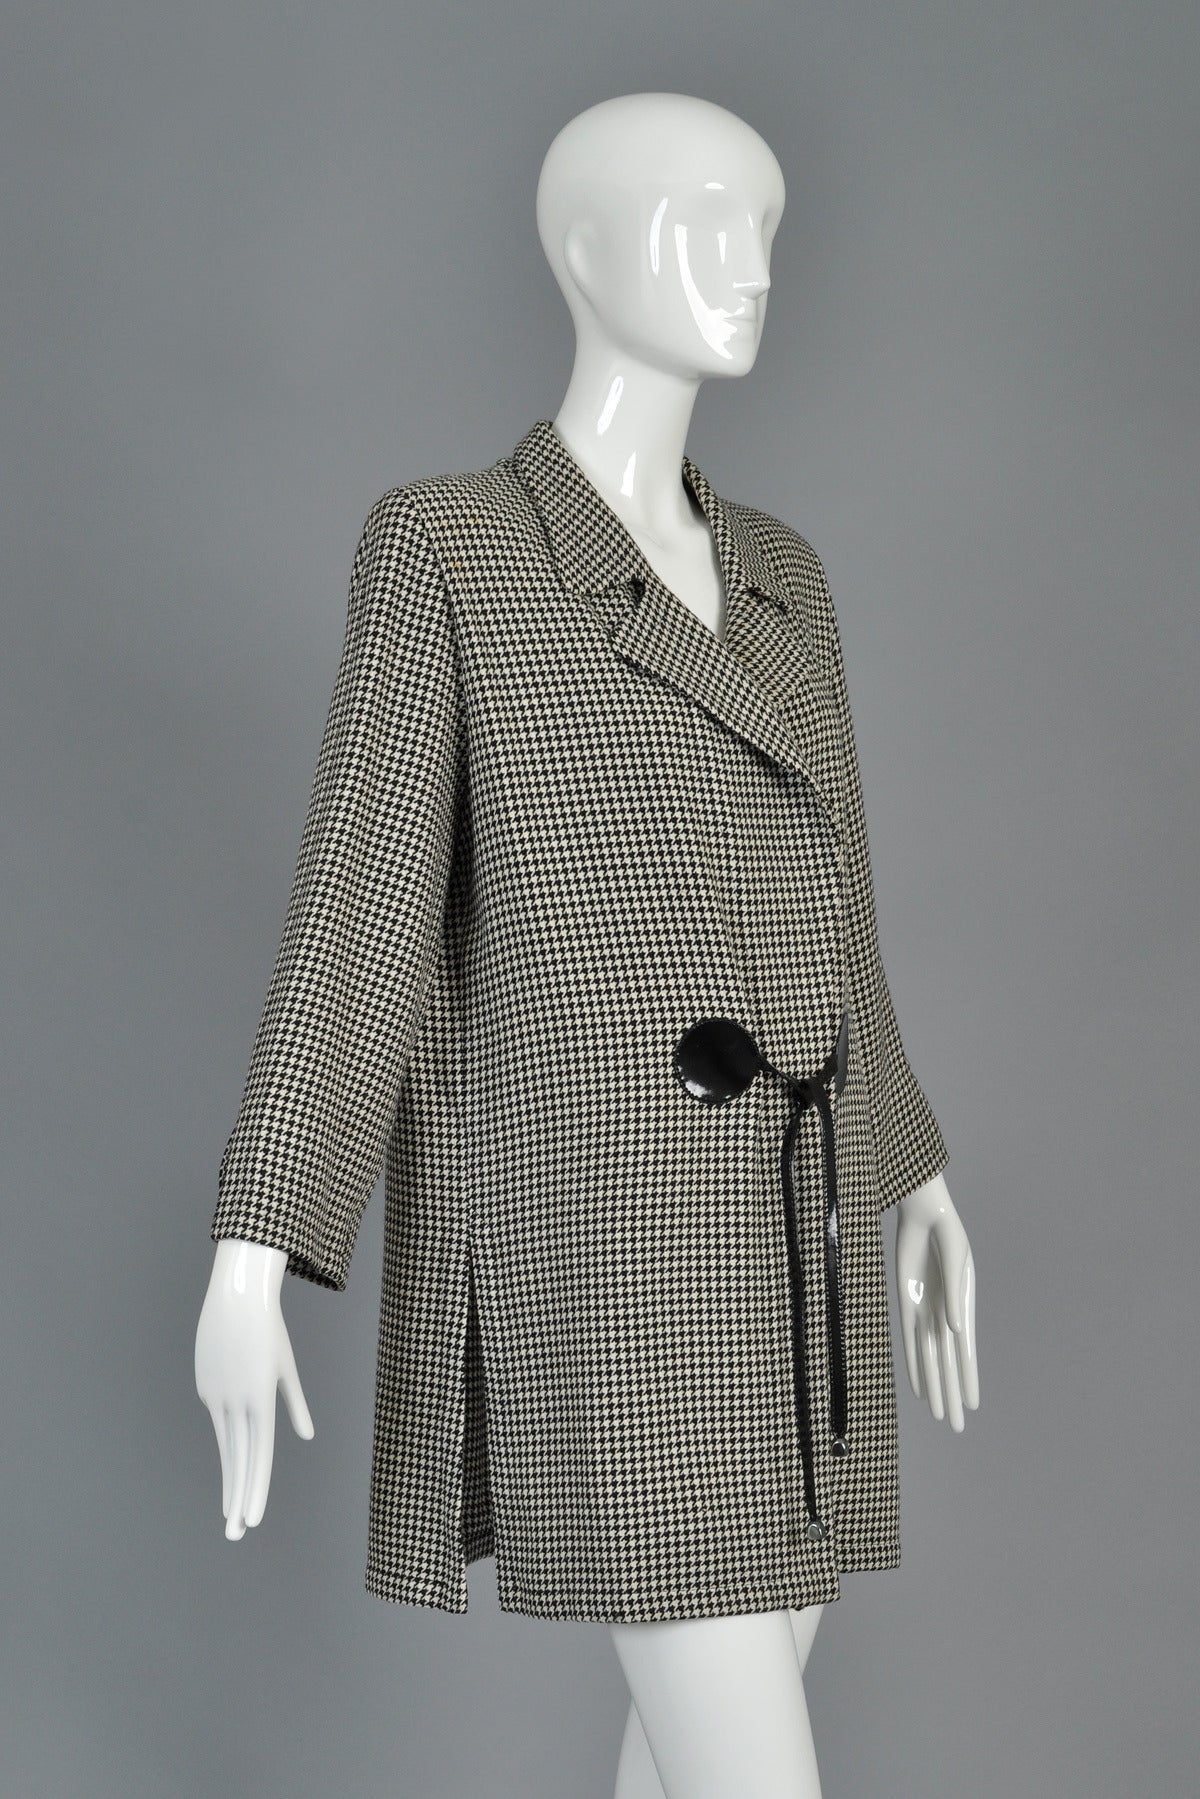 F/W 93 Pierre Cardin Haute Couture Houndstooth Vinyl Tie Jacket For Sale 1